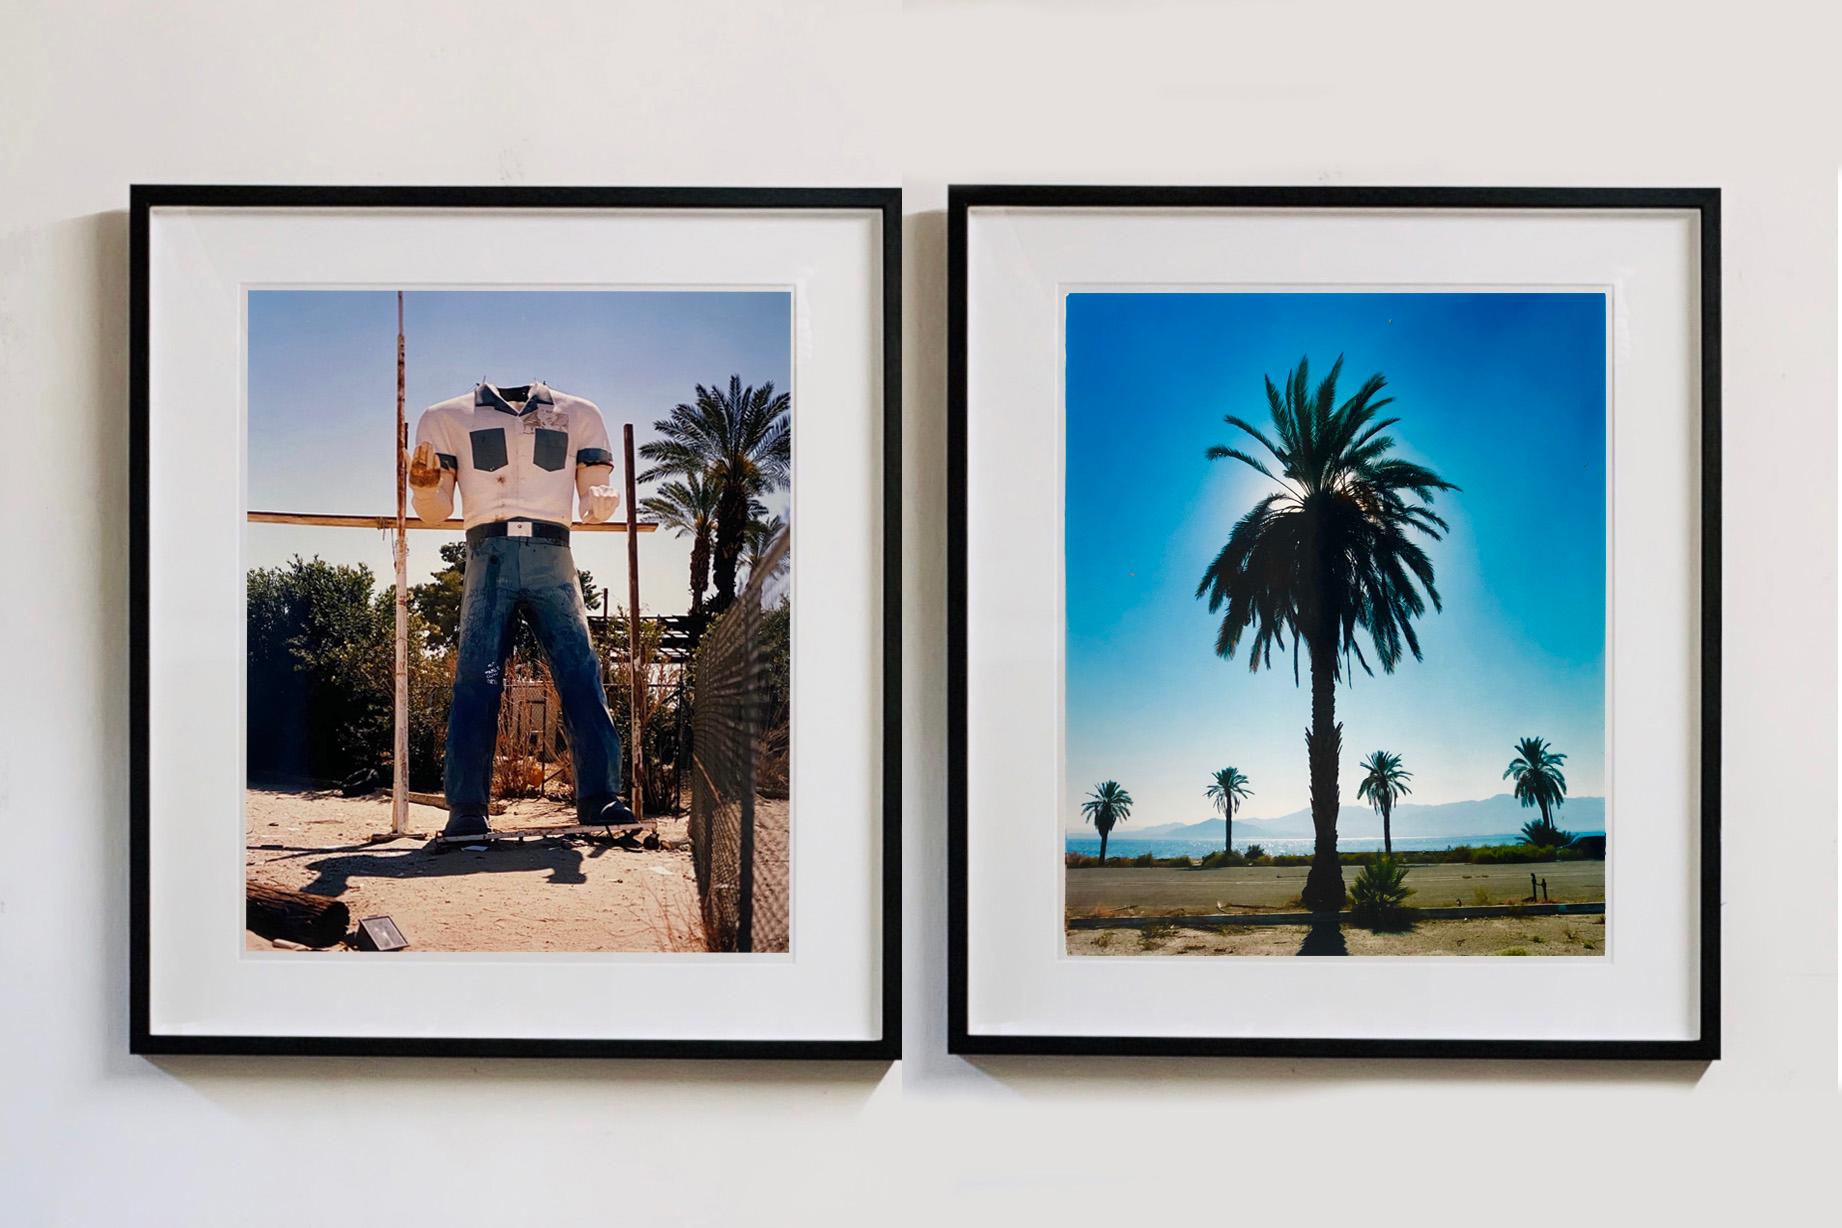 Poor Richard, a classic American icon, the roadside giant captured in the Salton Sea, California. Part of a series of pictures by Richard Heeps featuring the torso and head in the setting of the palm trees and desert dust and sun.

This artwork is a